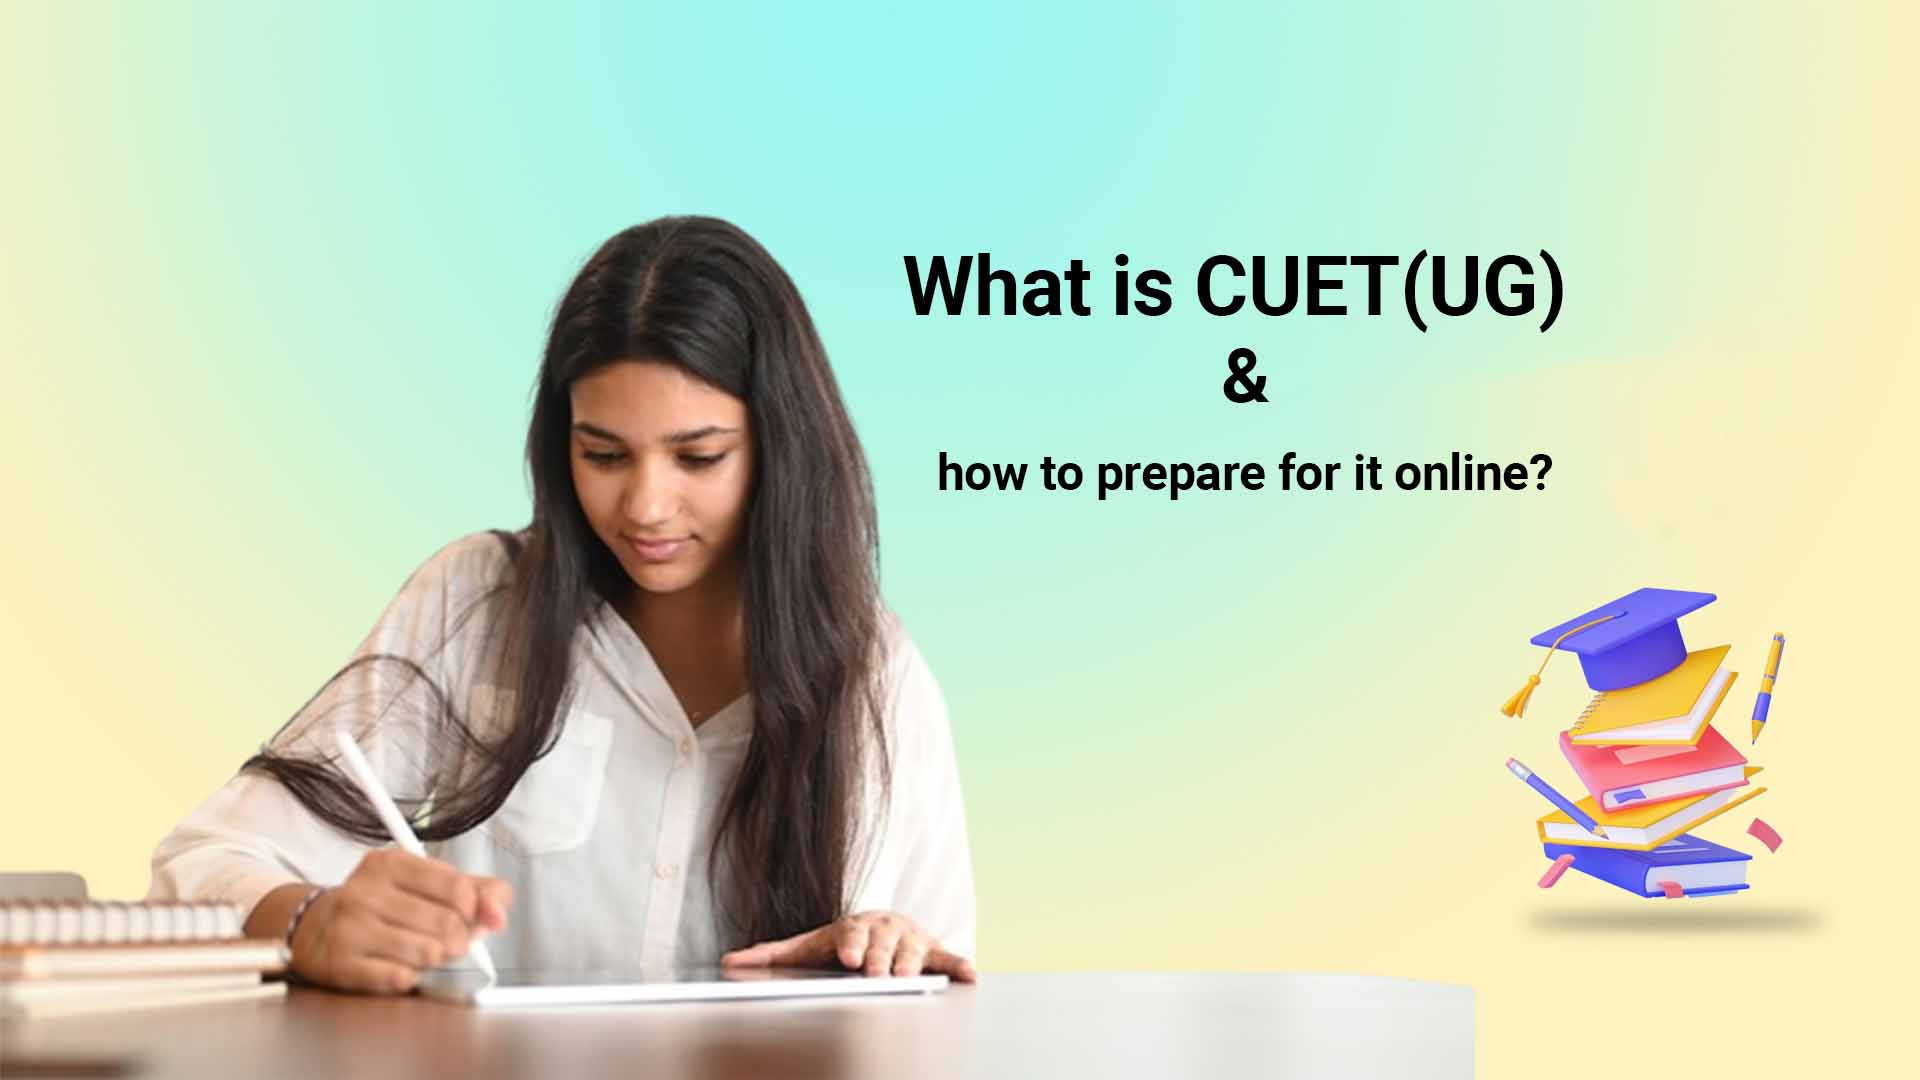 What is CUET(UG) and how to prepare for it online